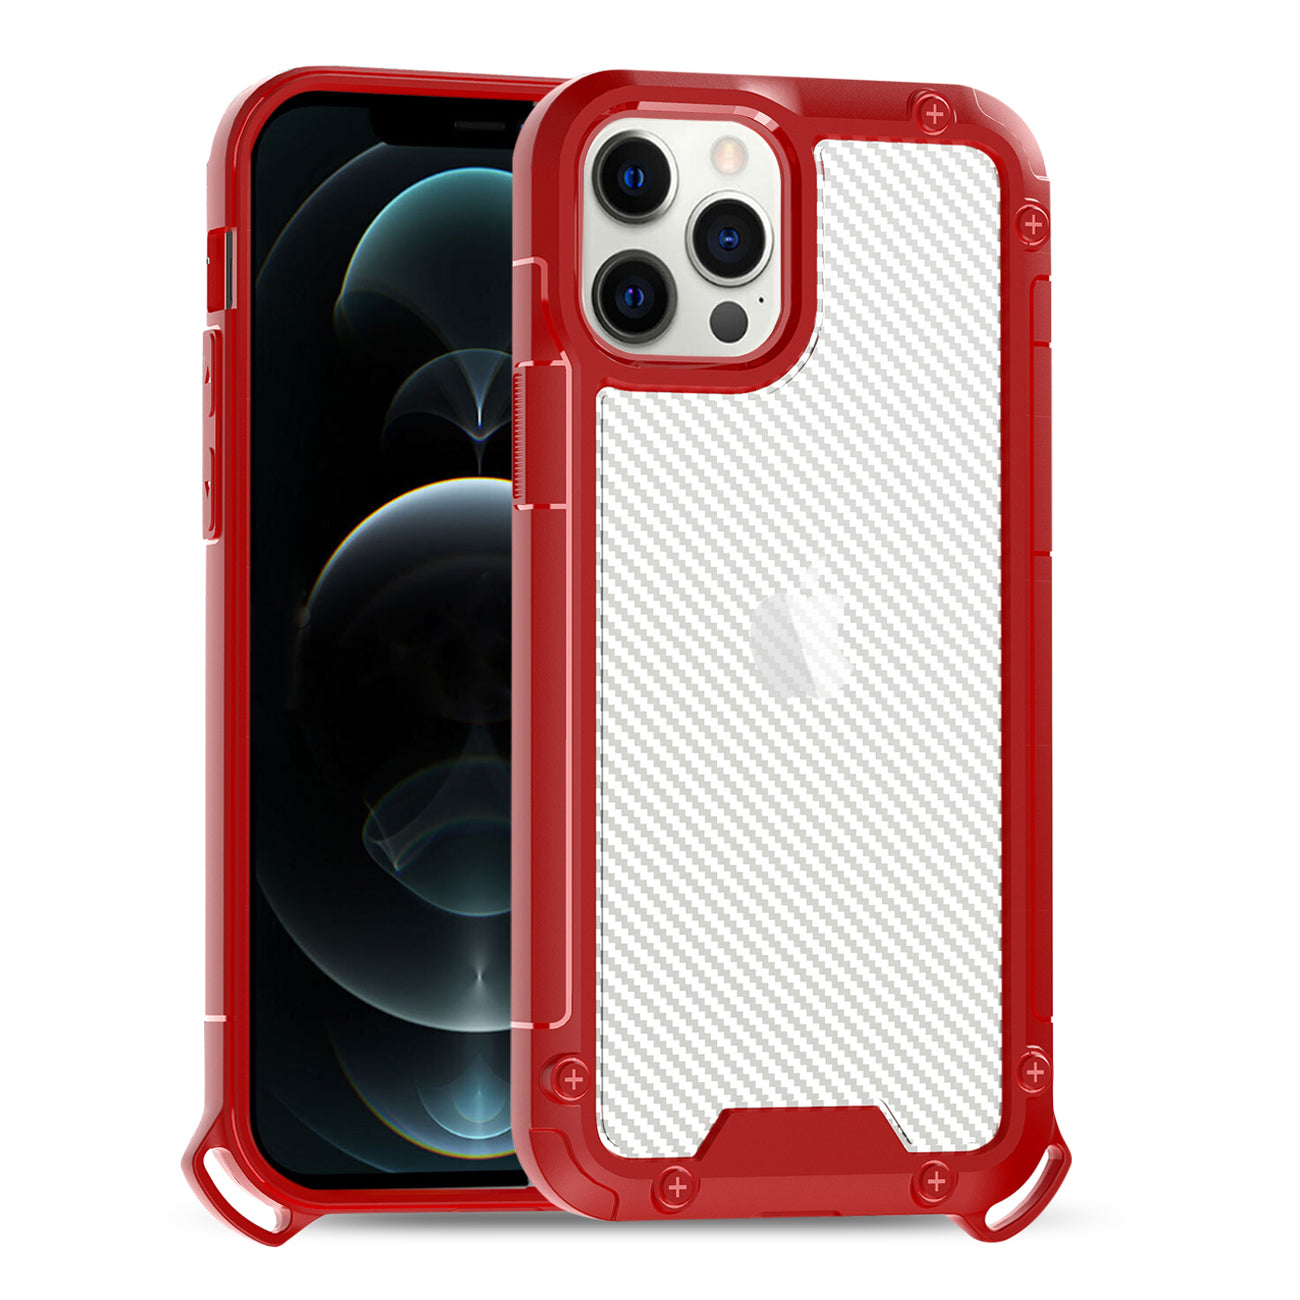 Reiko Shockproof PC Bumper Case With Carbon Fiber Pattern In Red For iPhone 12 / 12 Pro